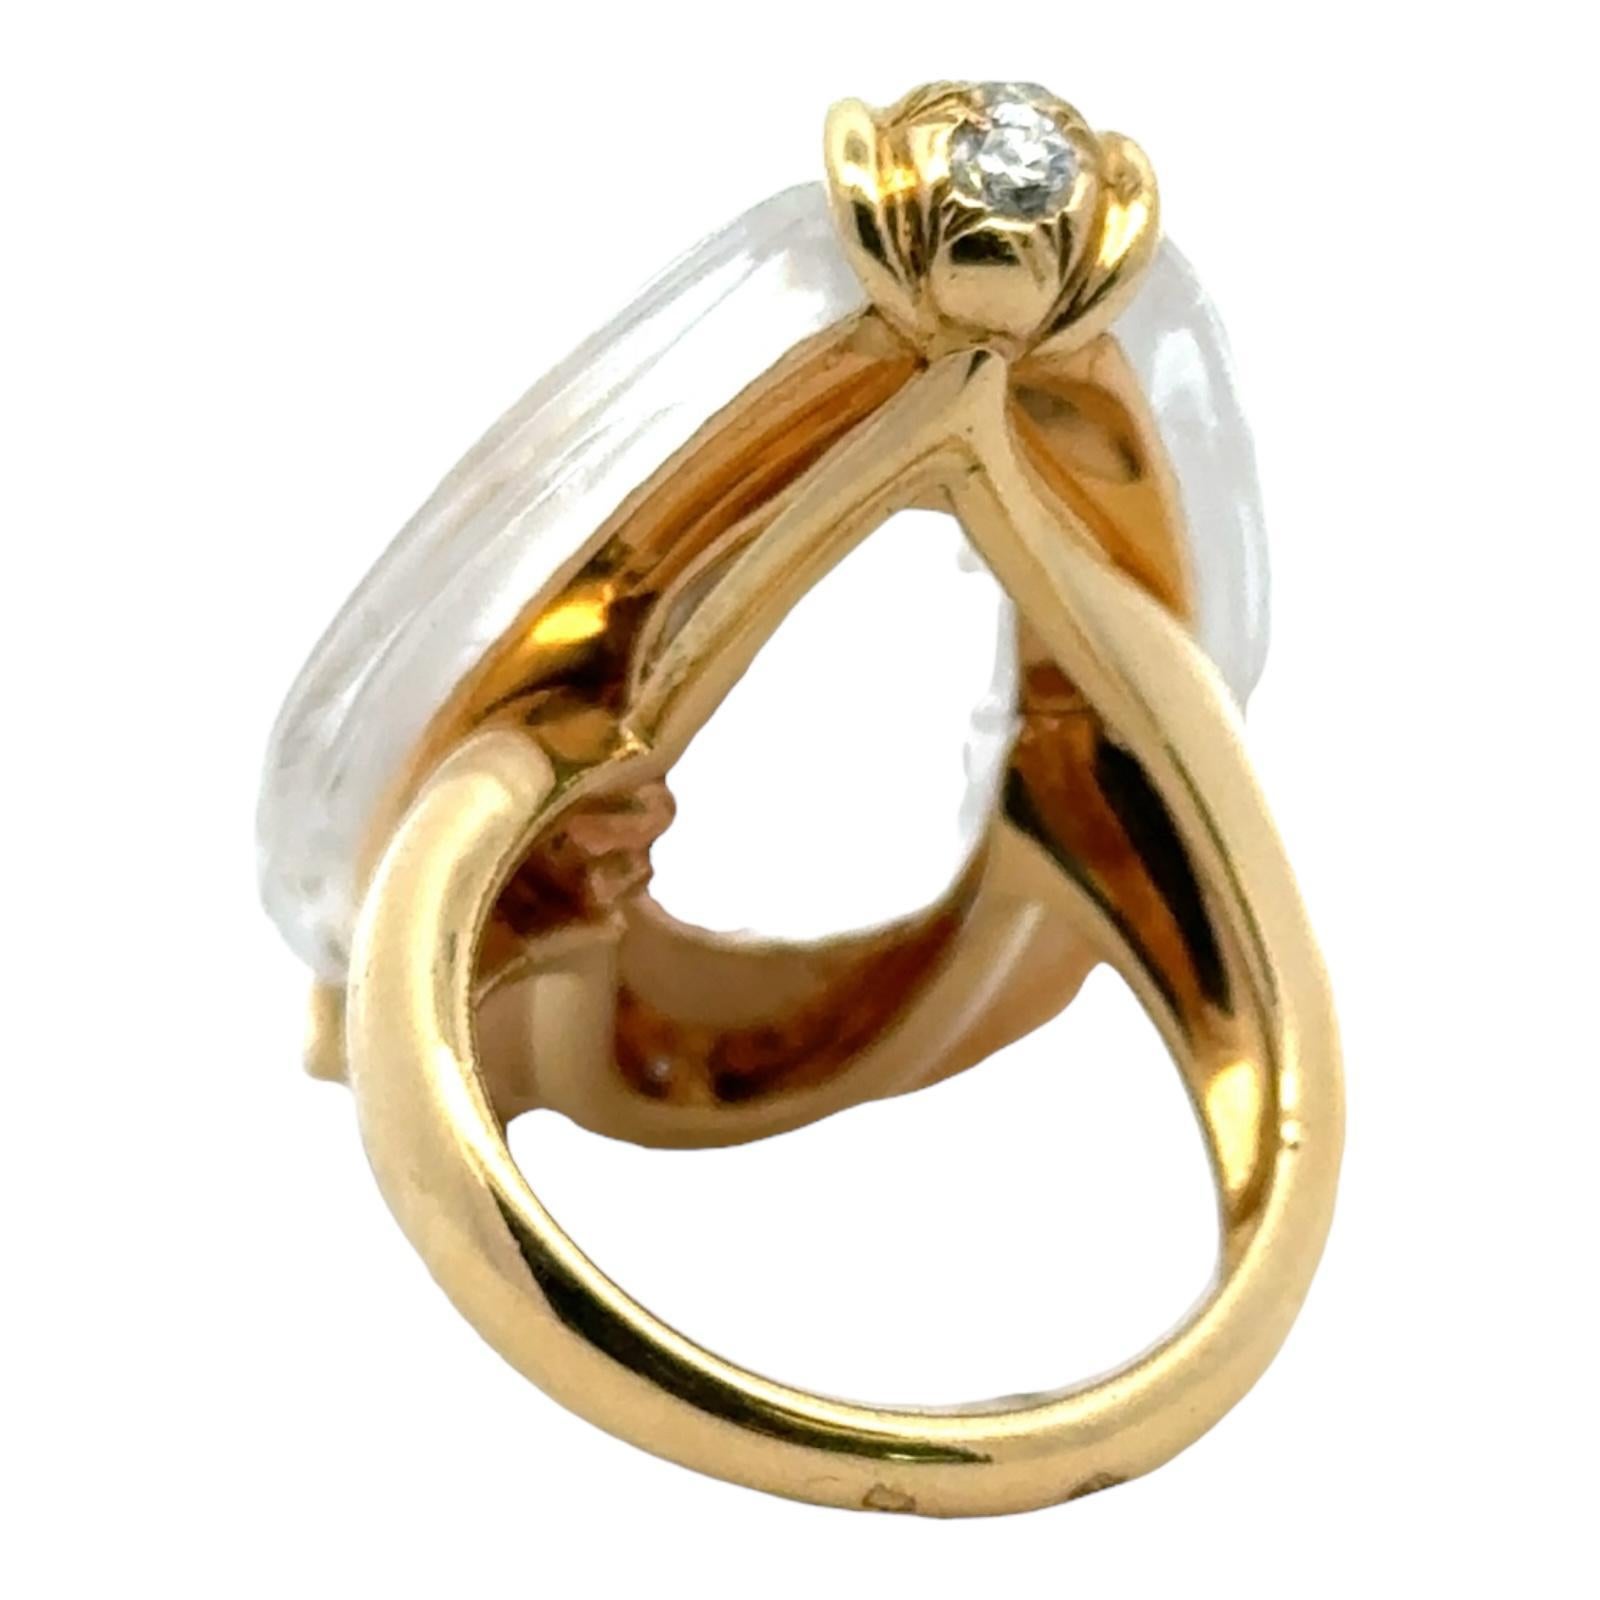 French Contemporary Rock Crystal Diamond 18 Karat Yellow Gold Cocktail Ring 2